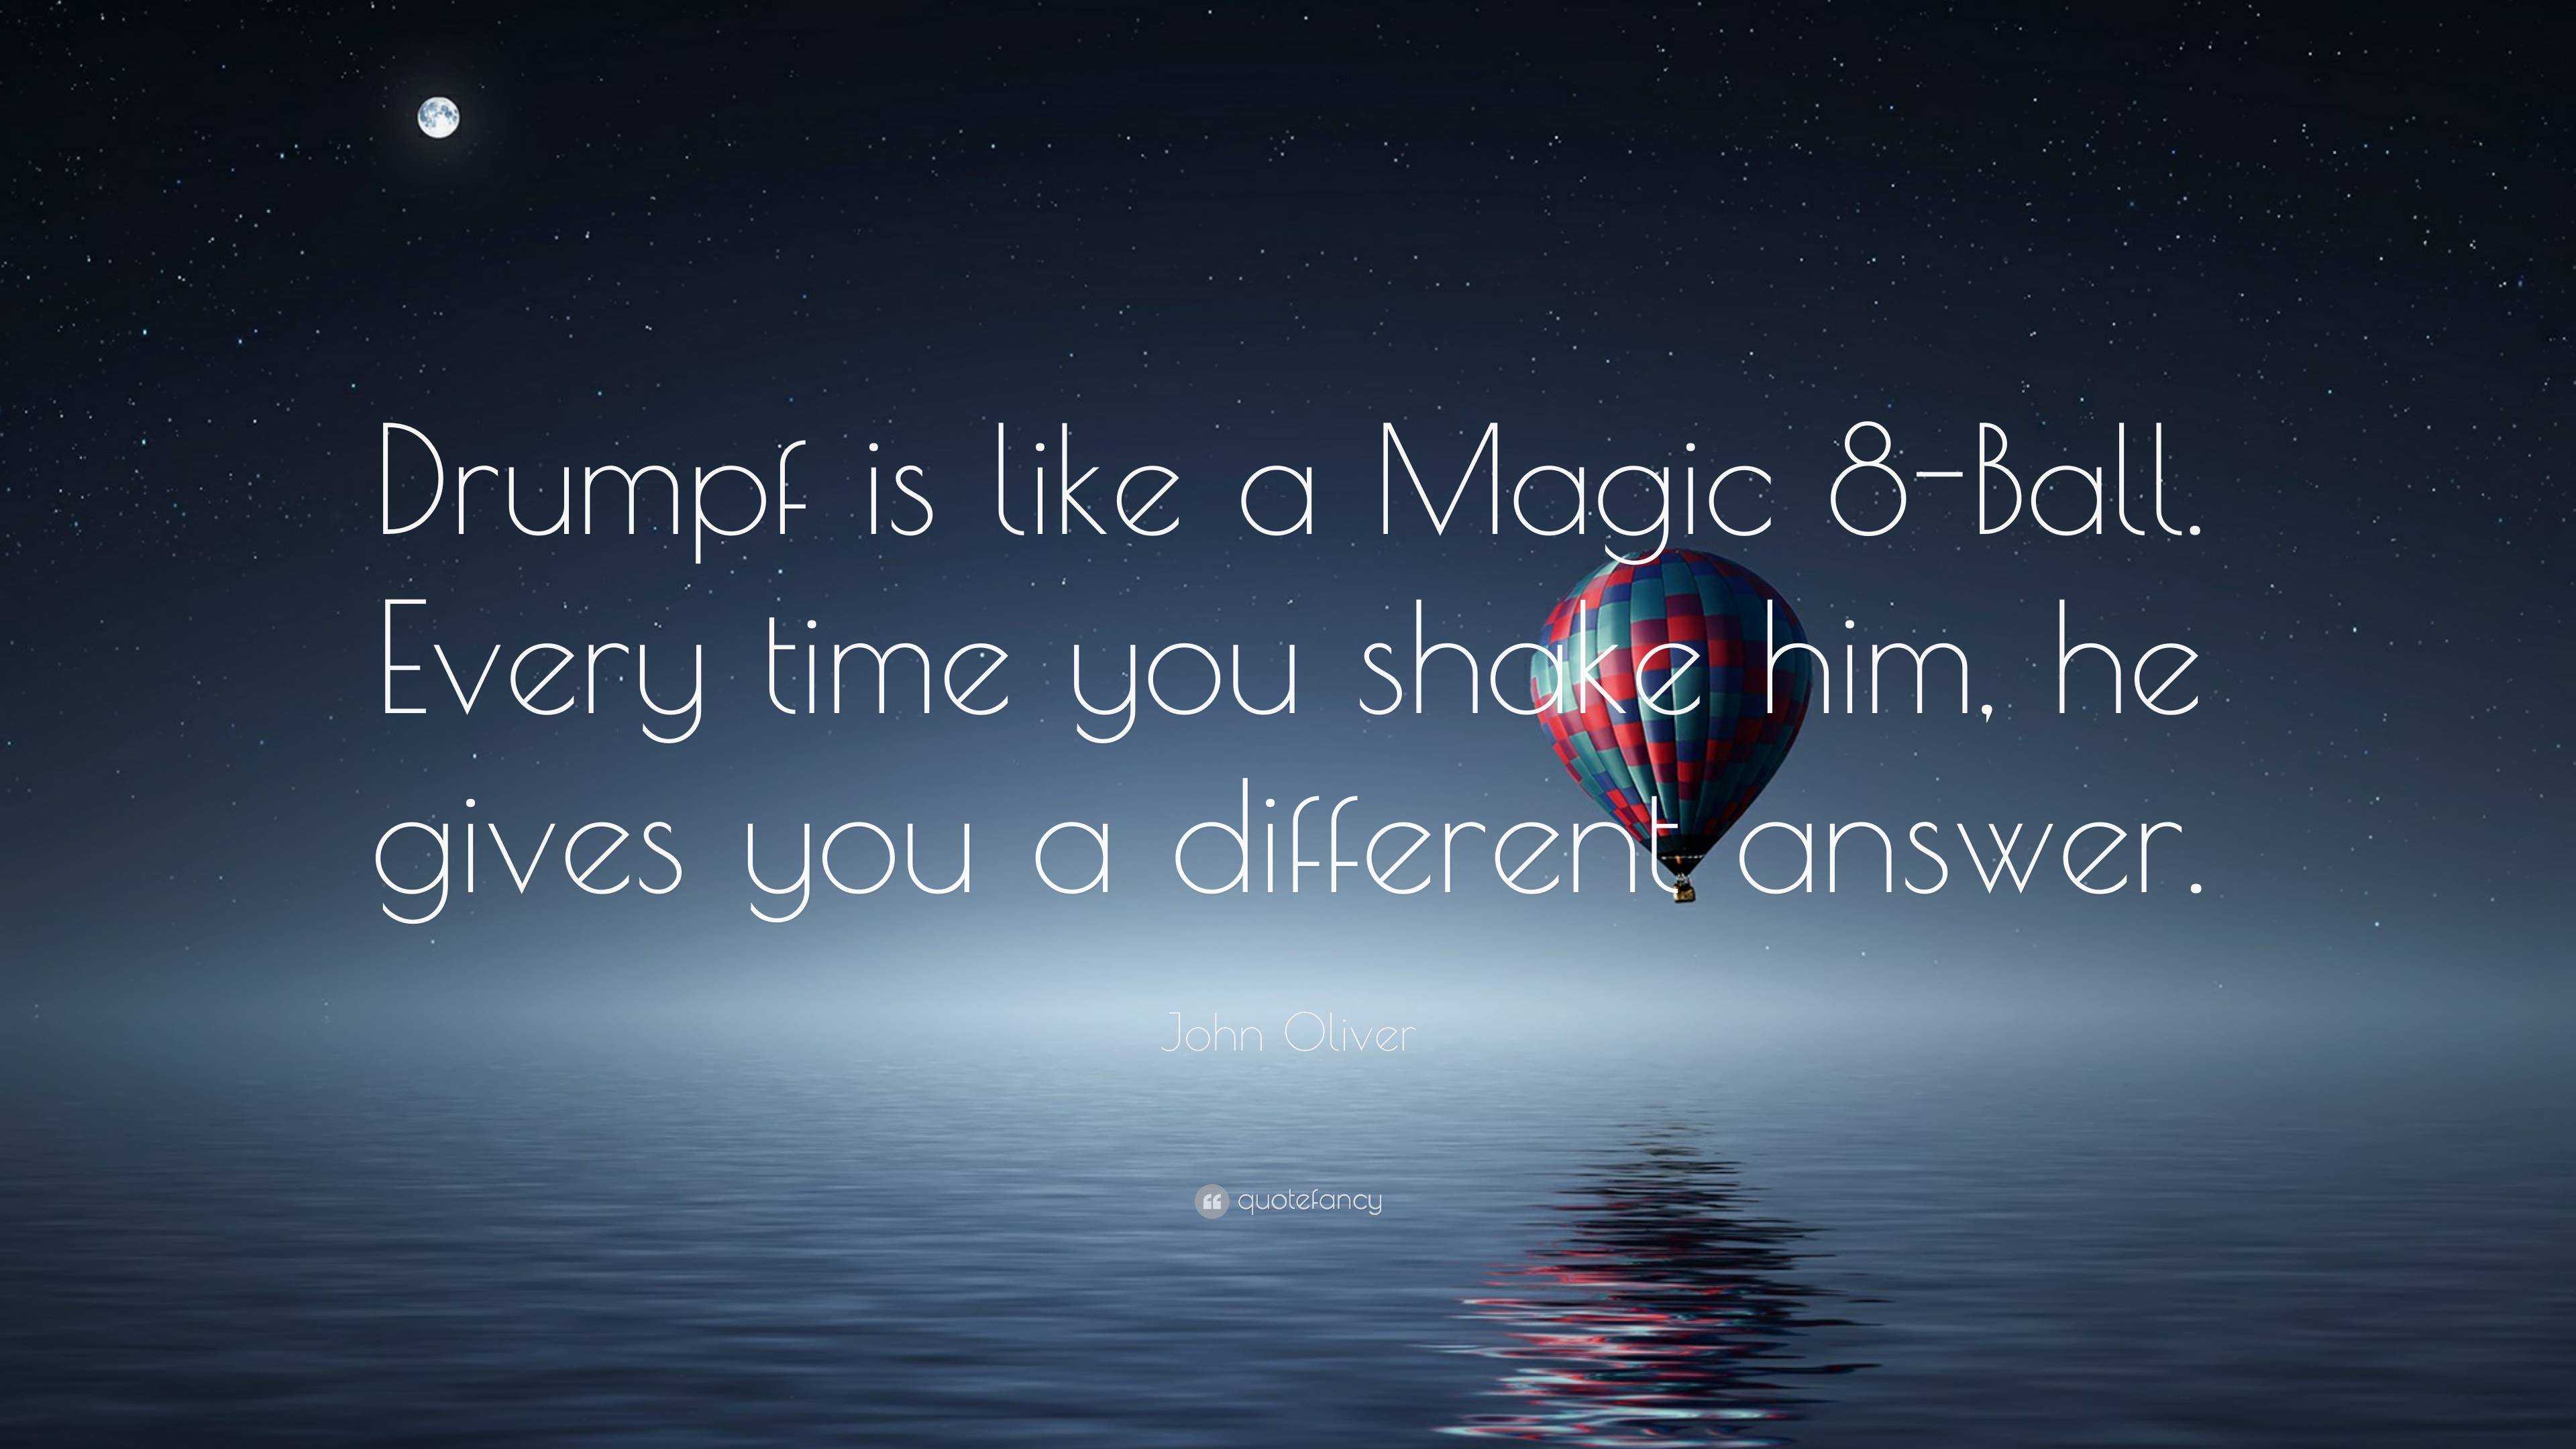 https://quotefancy.com/media/wallpaper/3840x2160/6520479-John-Oliver-Quote-Drumpf-is-like-a-Magic-8-Ball-Every-time-you.jpg